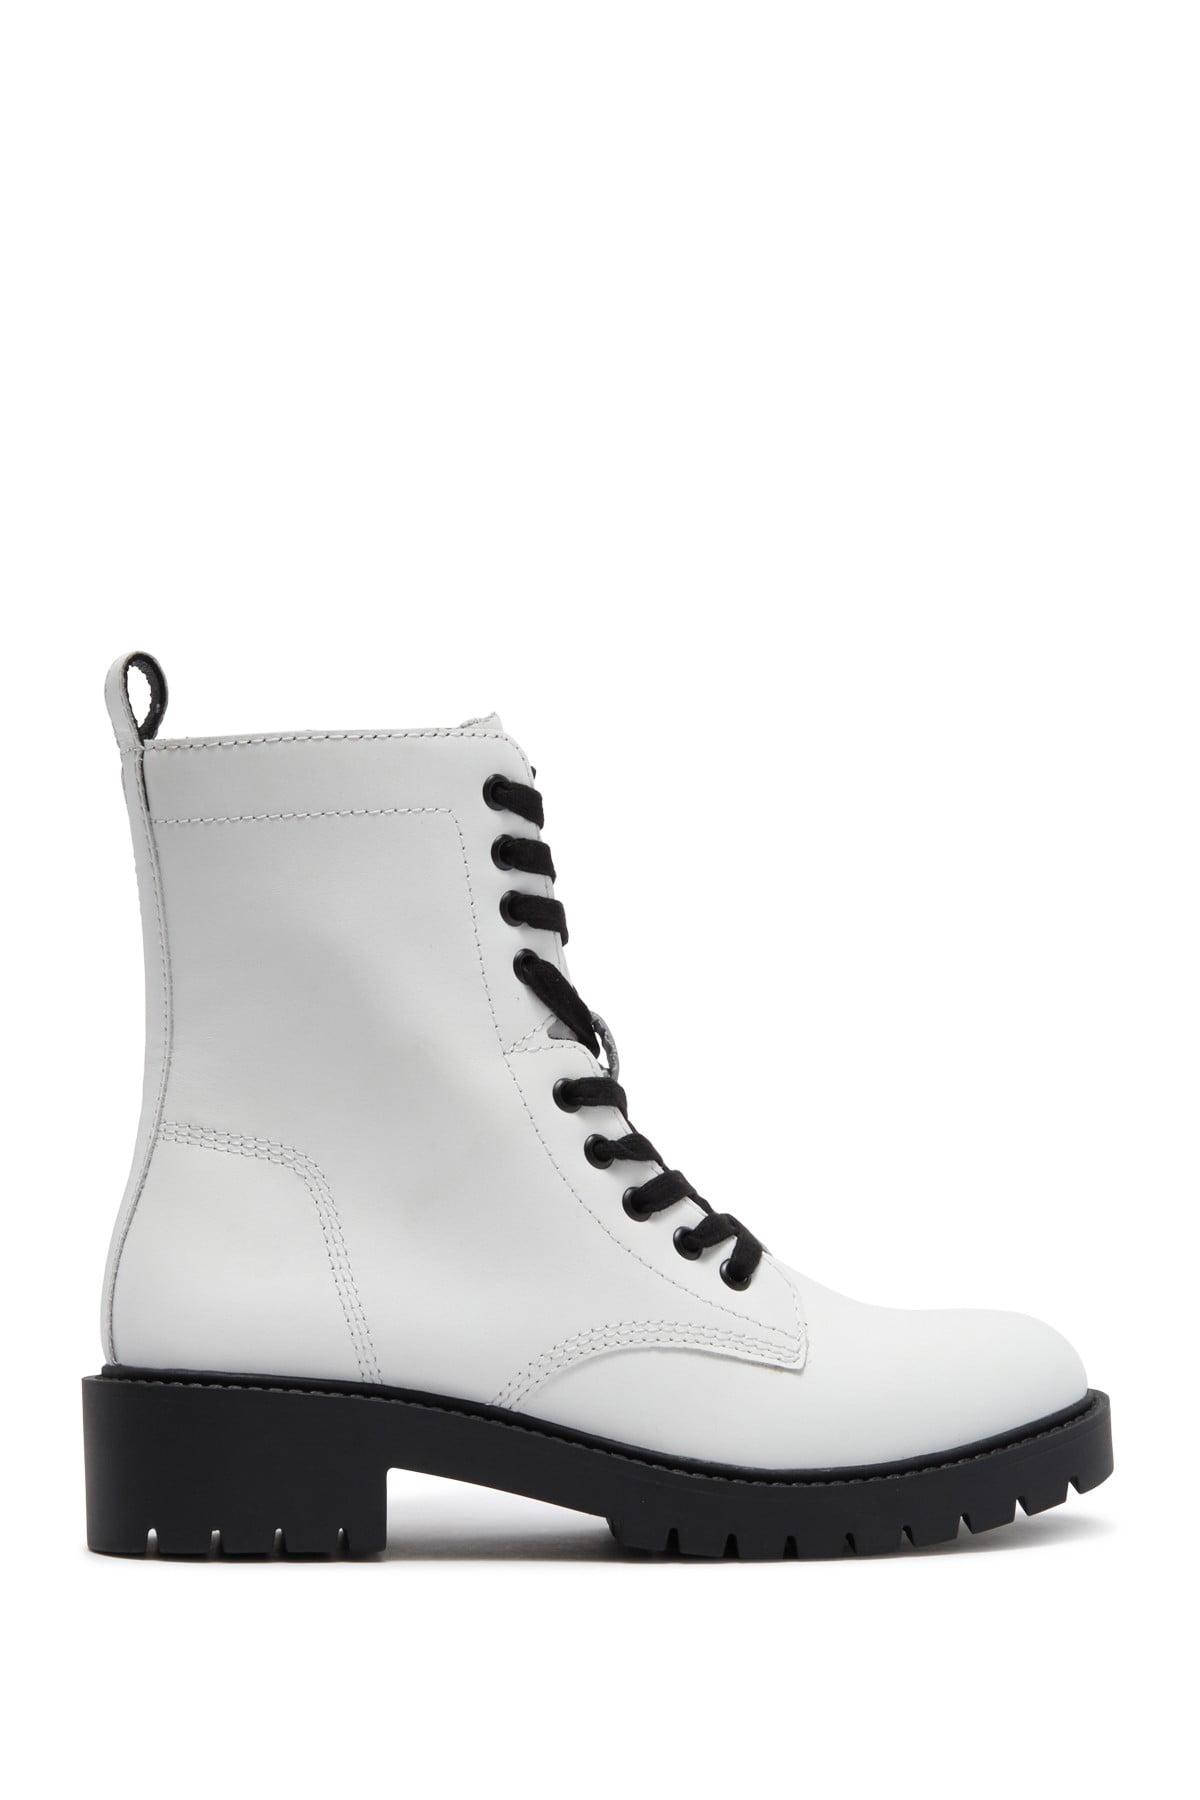 Steve Madden Synthetic Checker Combat Boot - Lyst